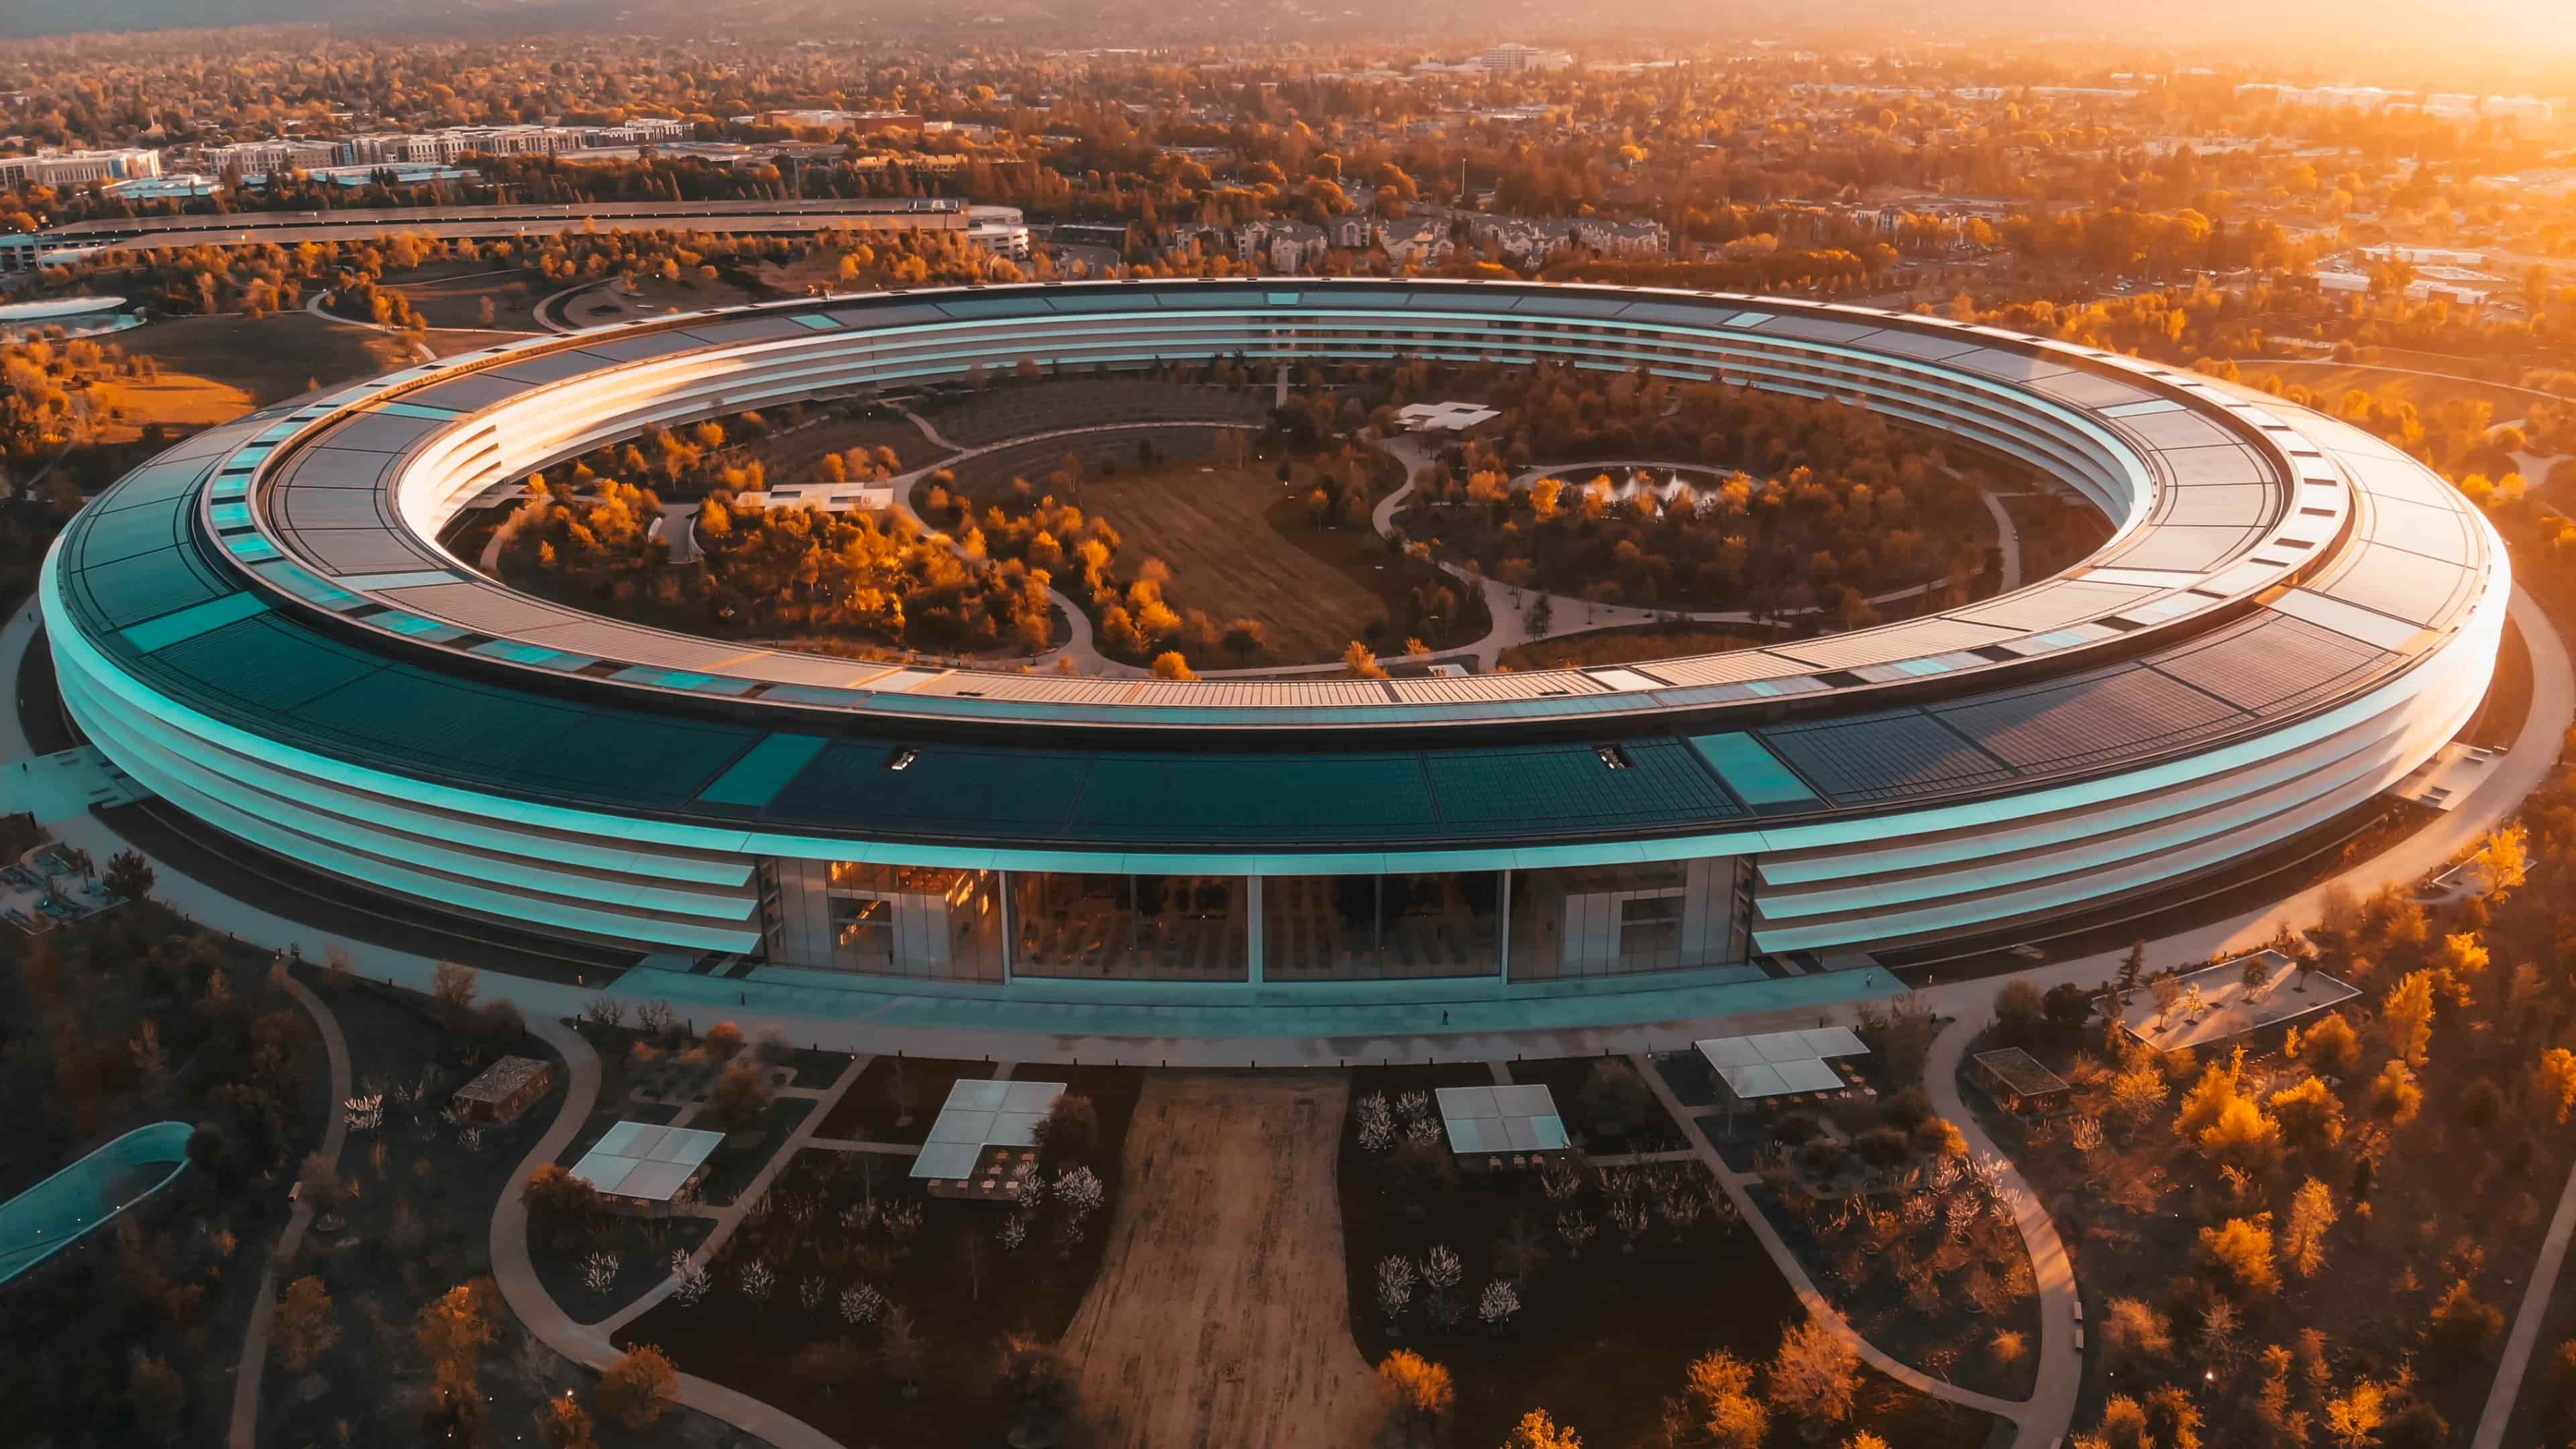 An aerial view of the Apple Park headquarters taken at sunset during the golden hour period